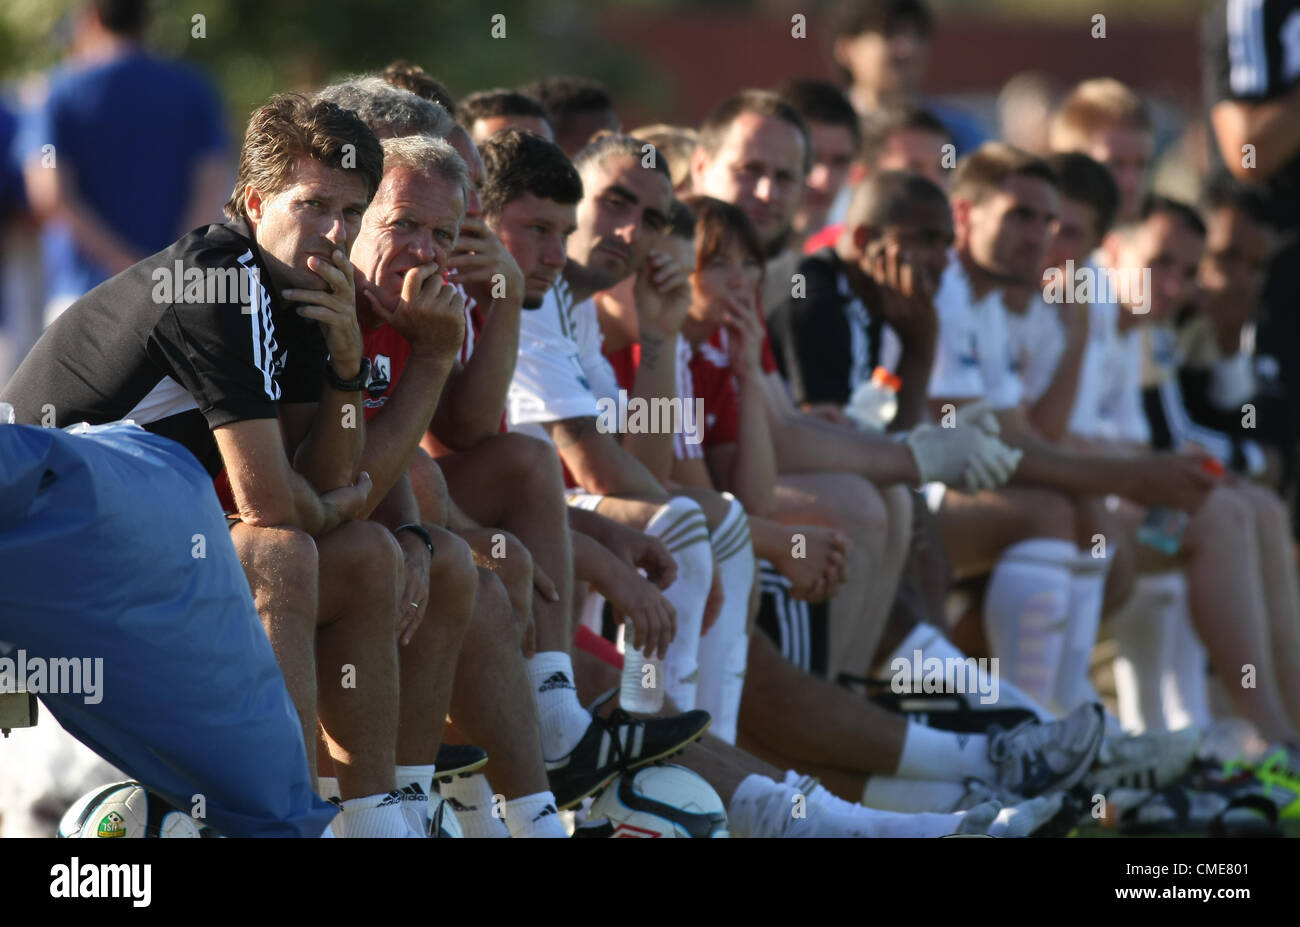 MICHAEL LAUDRUP SAT ON THE BEN SWANSEA CITY A.F.C. MANAGER OXNARD CALIFORNIA USA 28 July 2012 Stock Photo